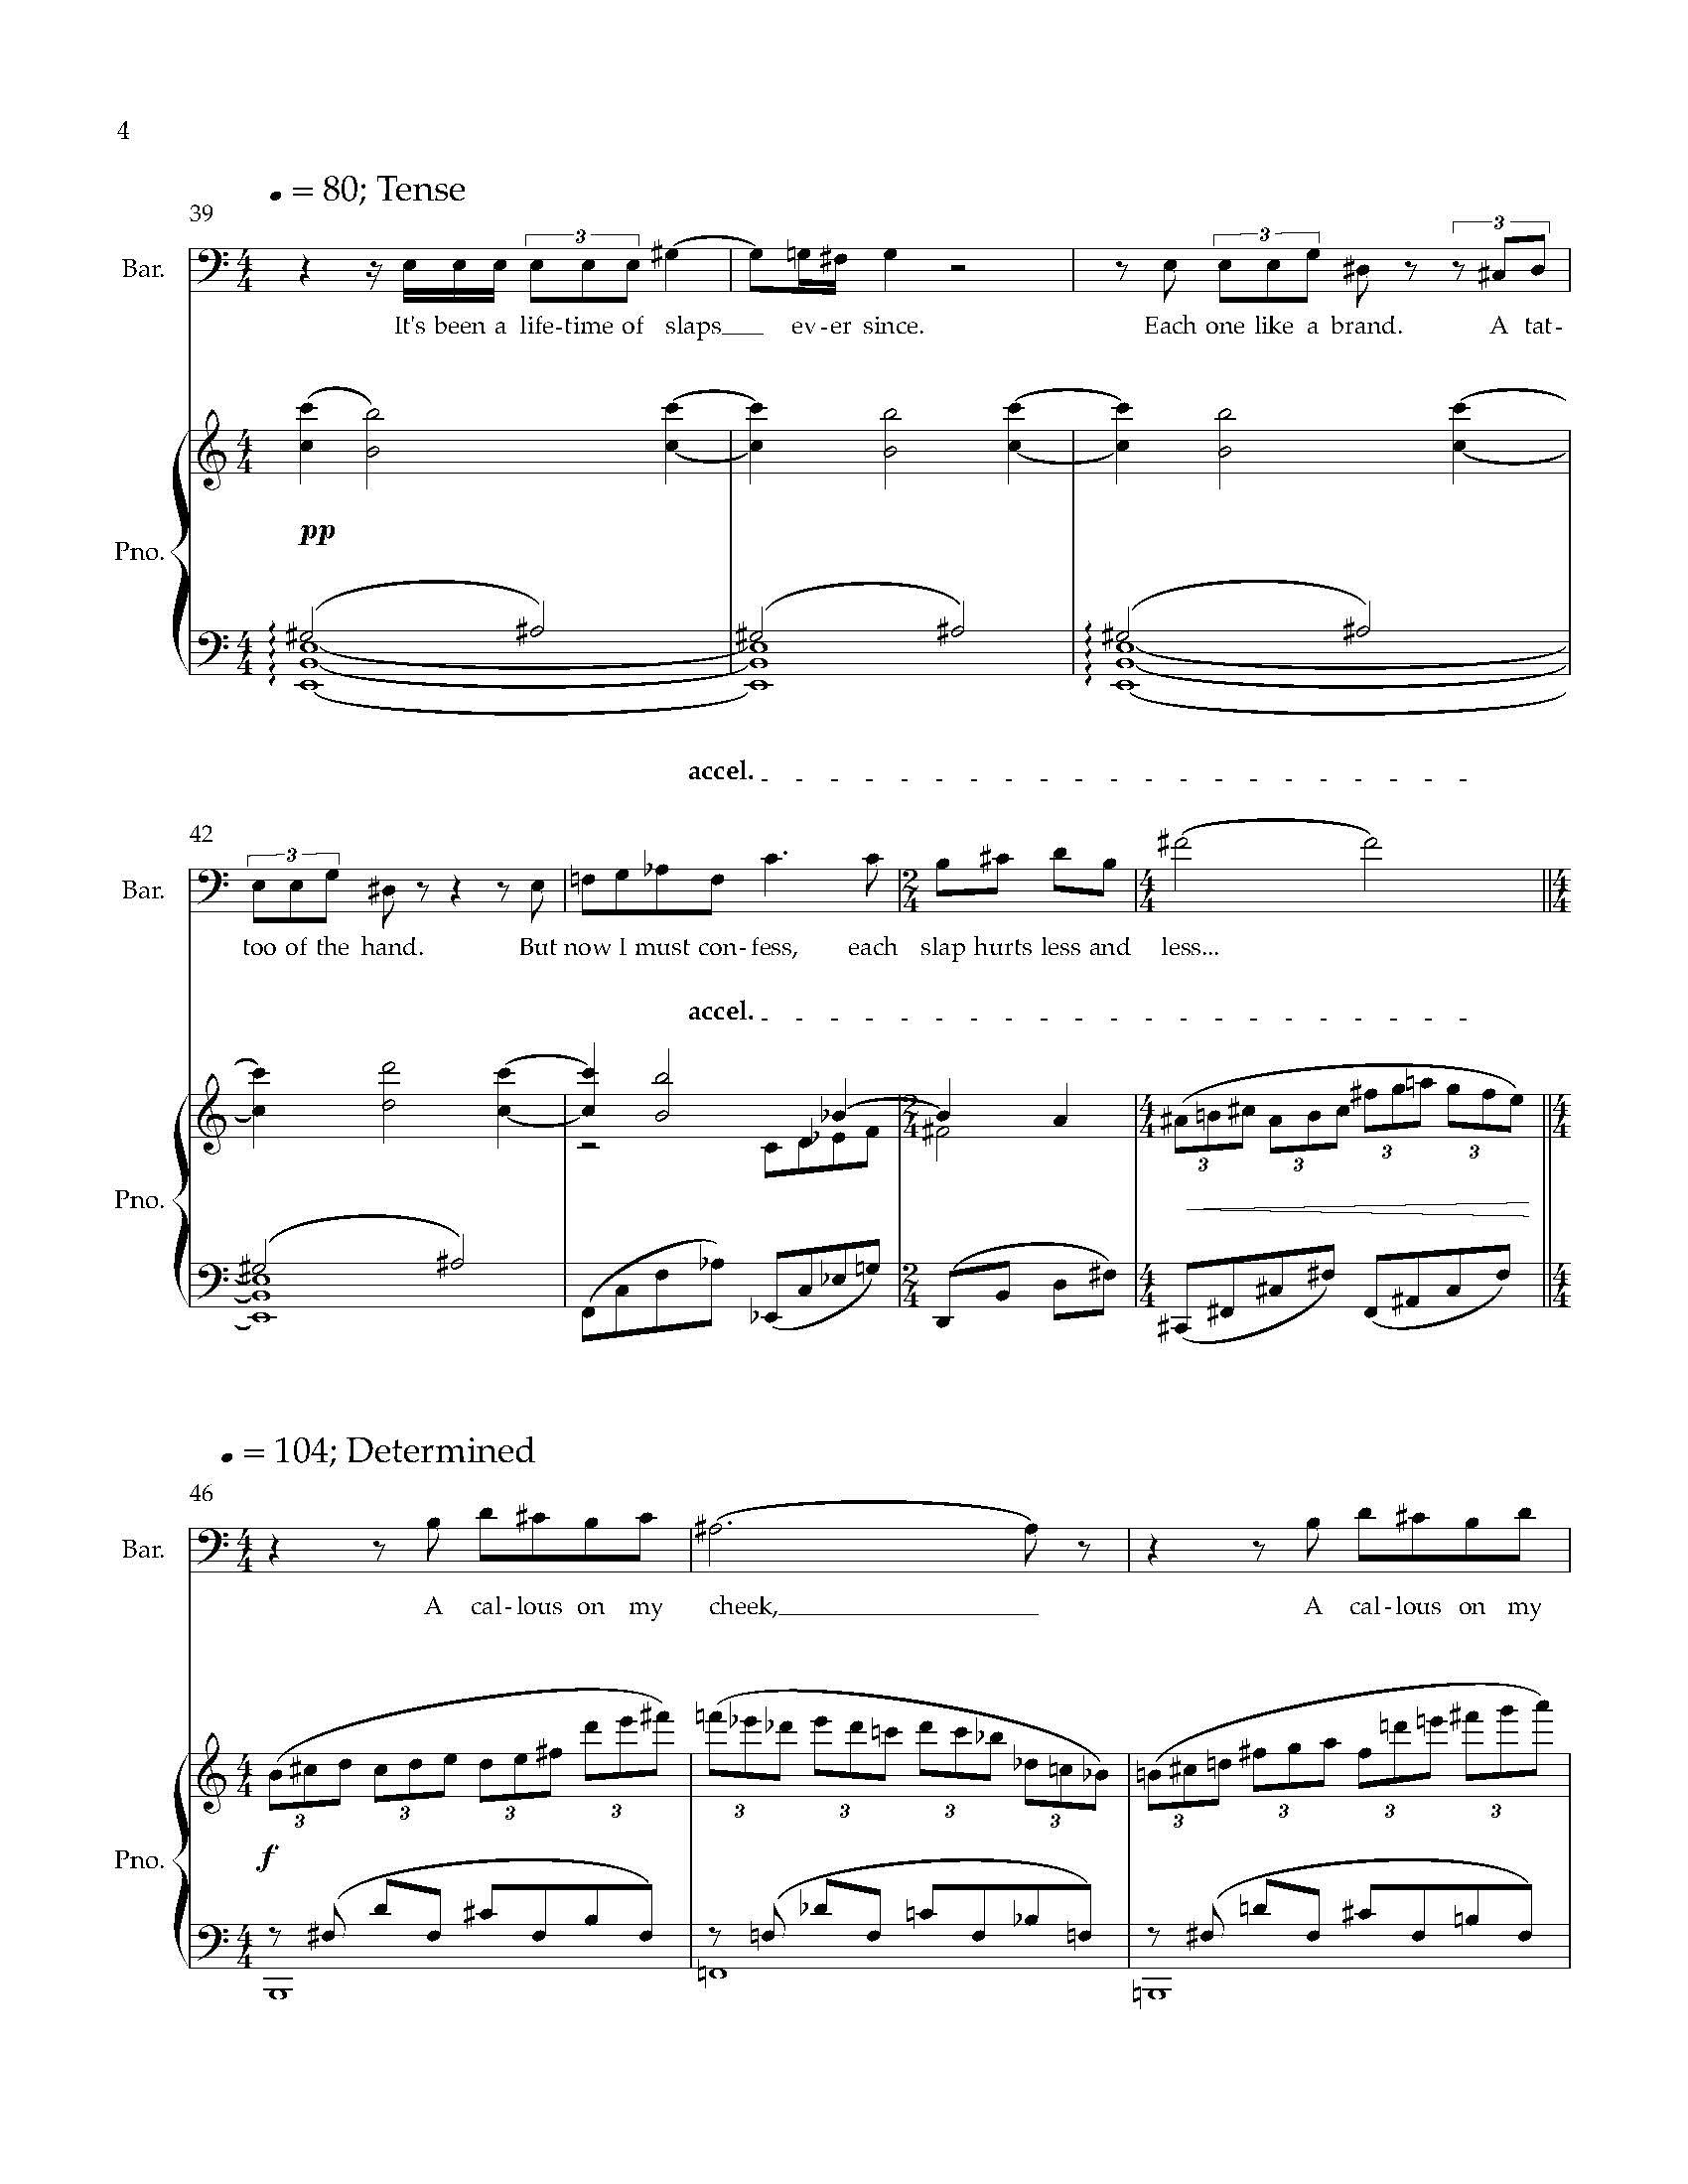 Five Arias from HWGS - Complete Score (1)_Page_08.jpg